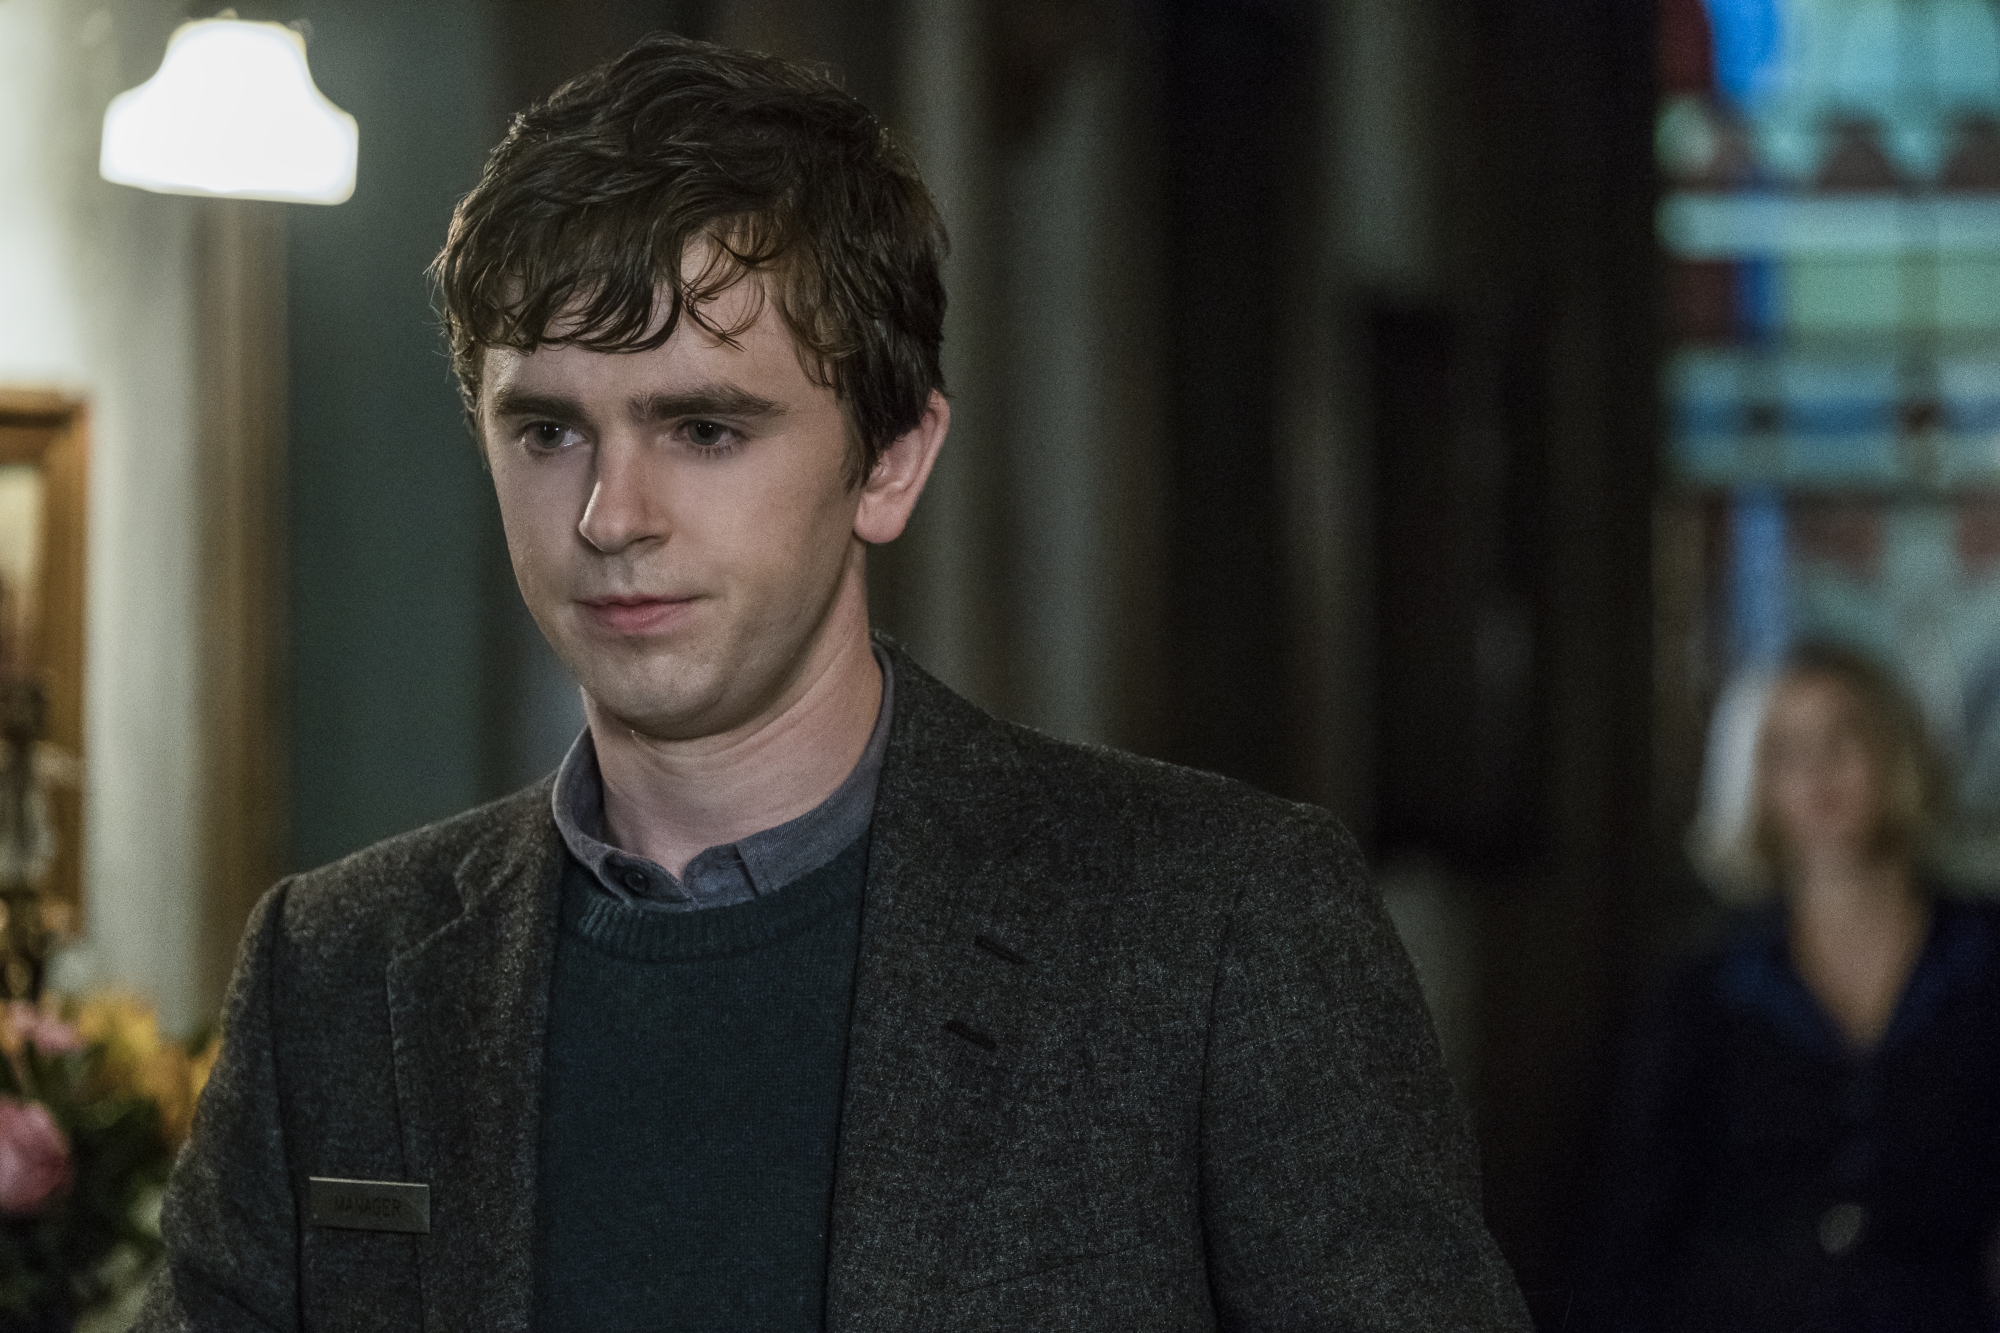 Freddie Highmore stars as Norman Bates in A&E's "Bates Motel" Photo by Cate Cameron Copyright 2017